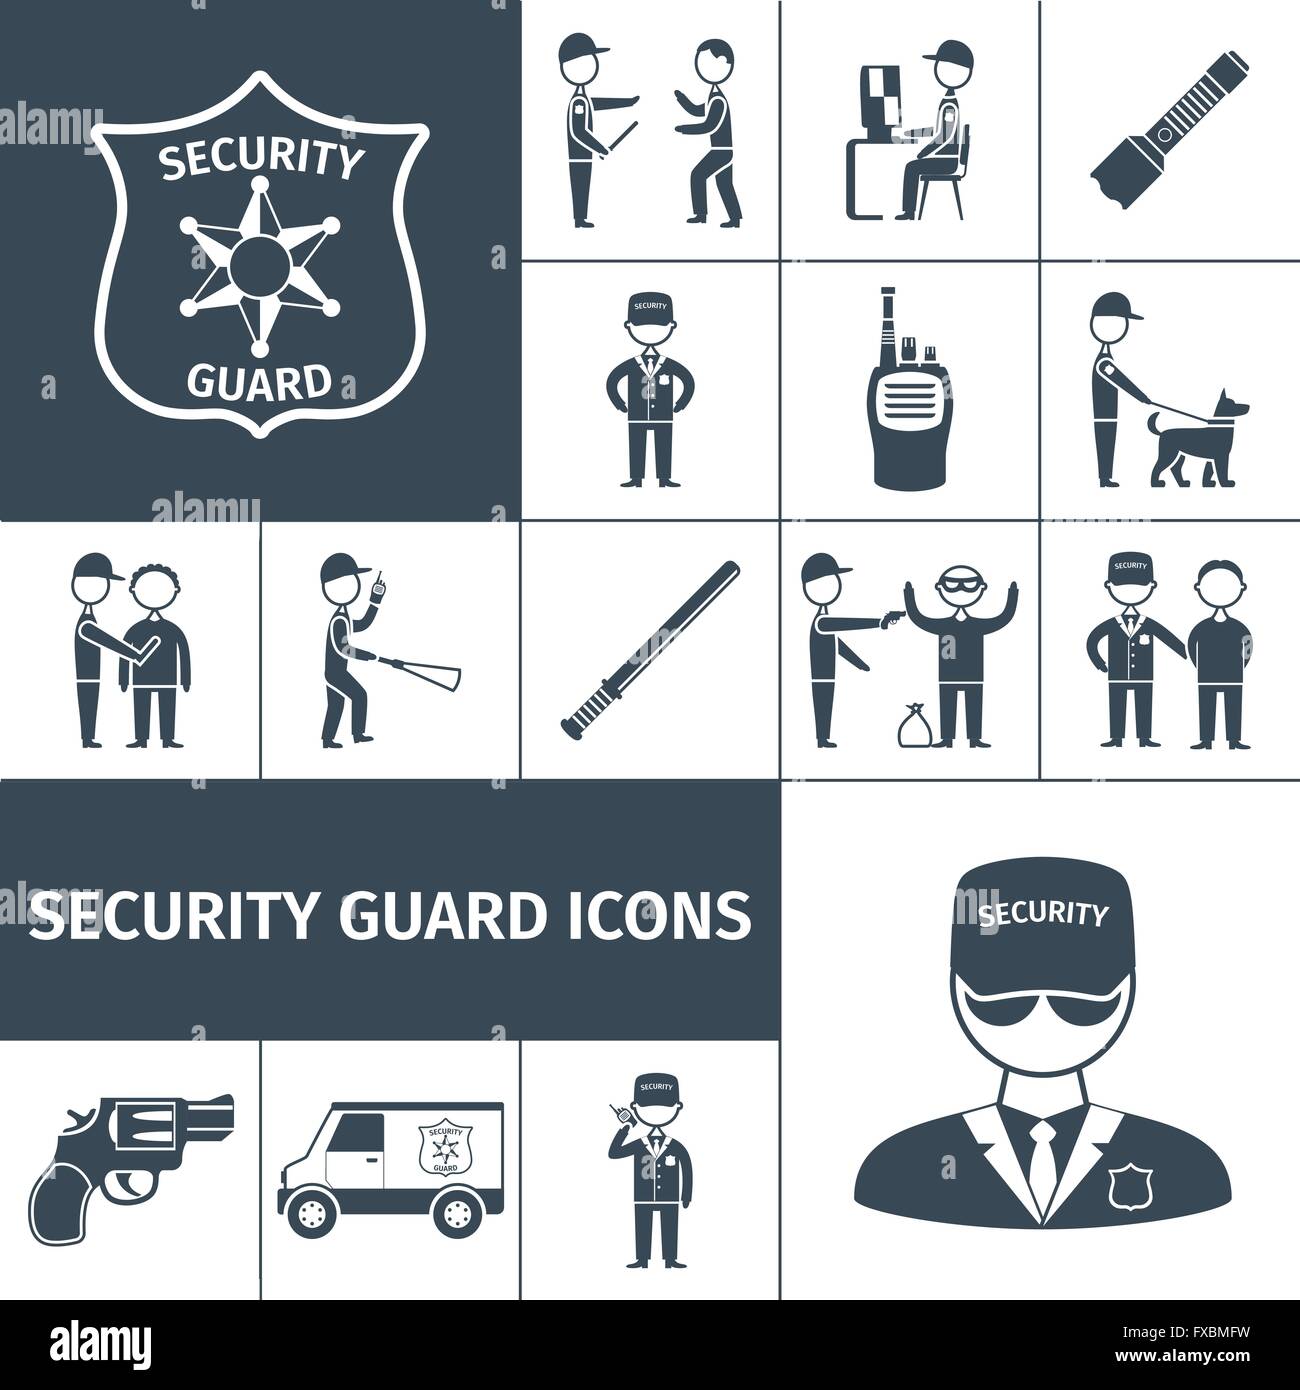 Security guard black icons set Stock Vector